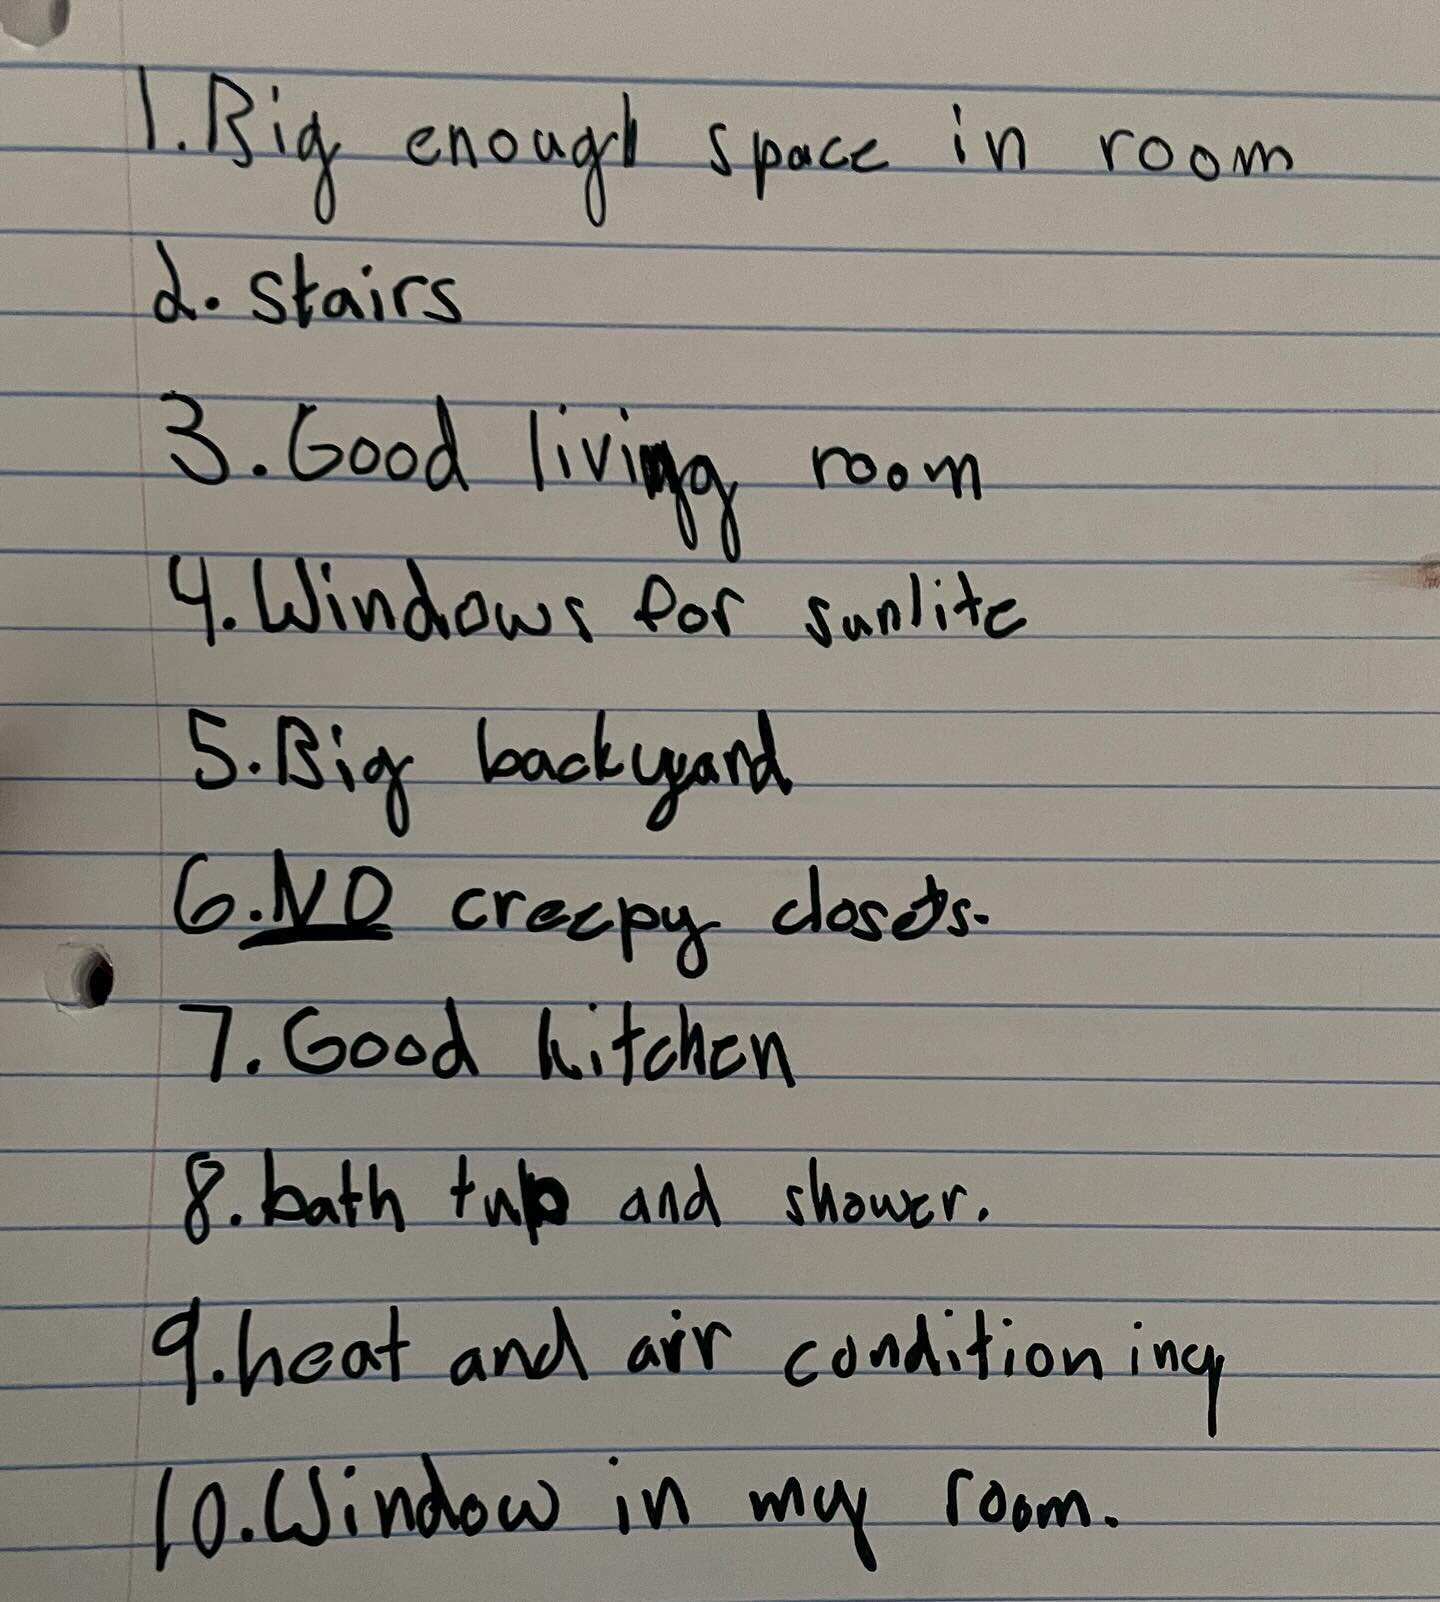 The BEST buyer needs list courtesy of an 8 yr old who is currently looking for a new home 🧡

I definitely need more info on #6 - NO creepy closets. 

#forsale #buyerslist #eugene #realestate #oregon